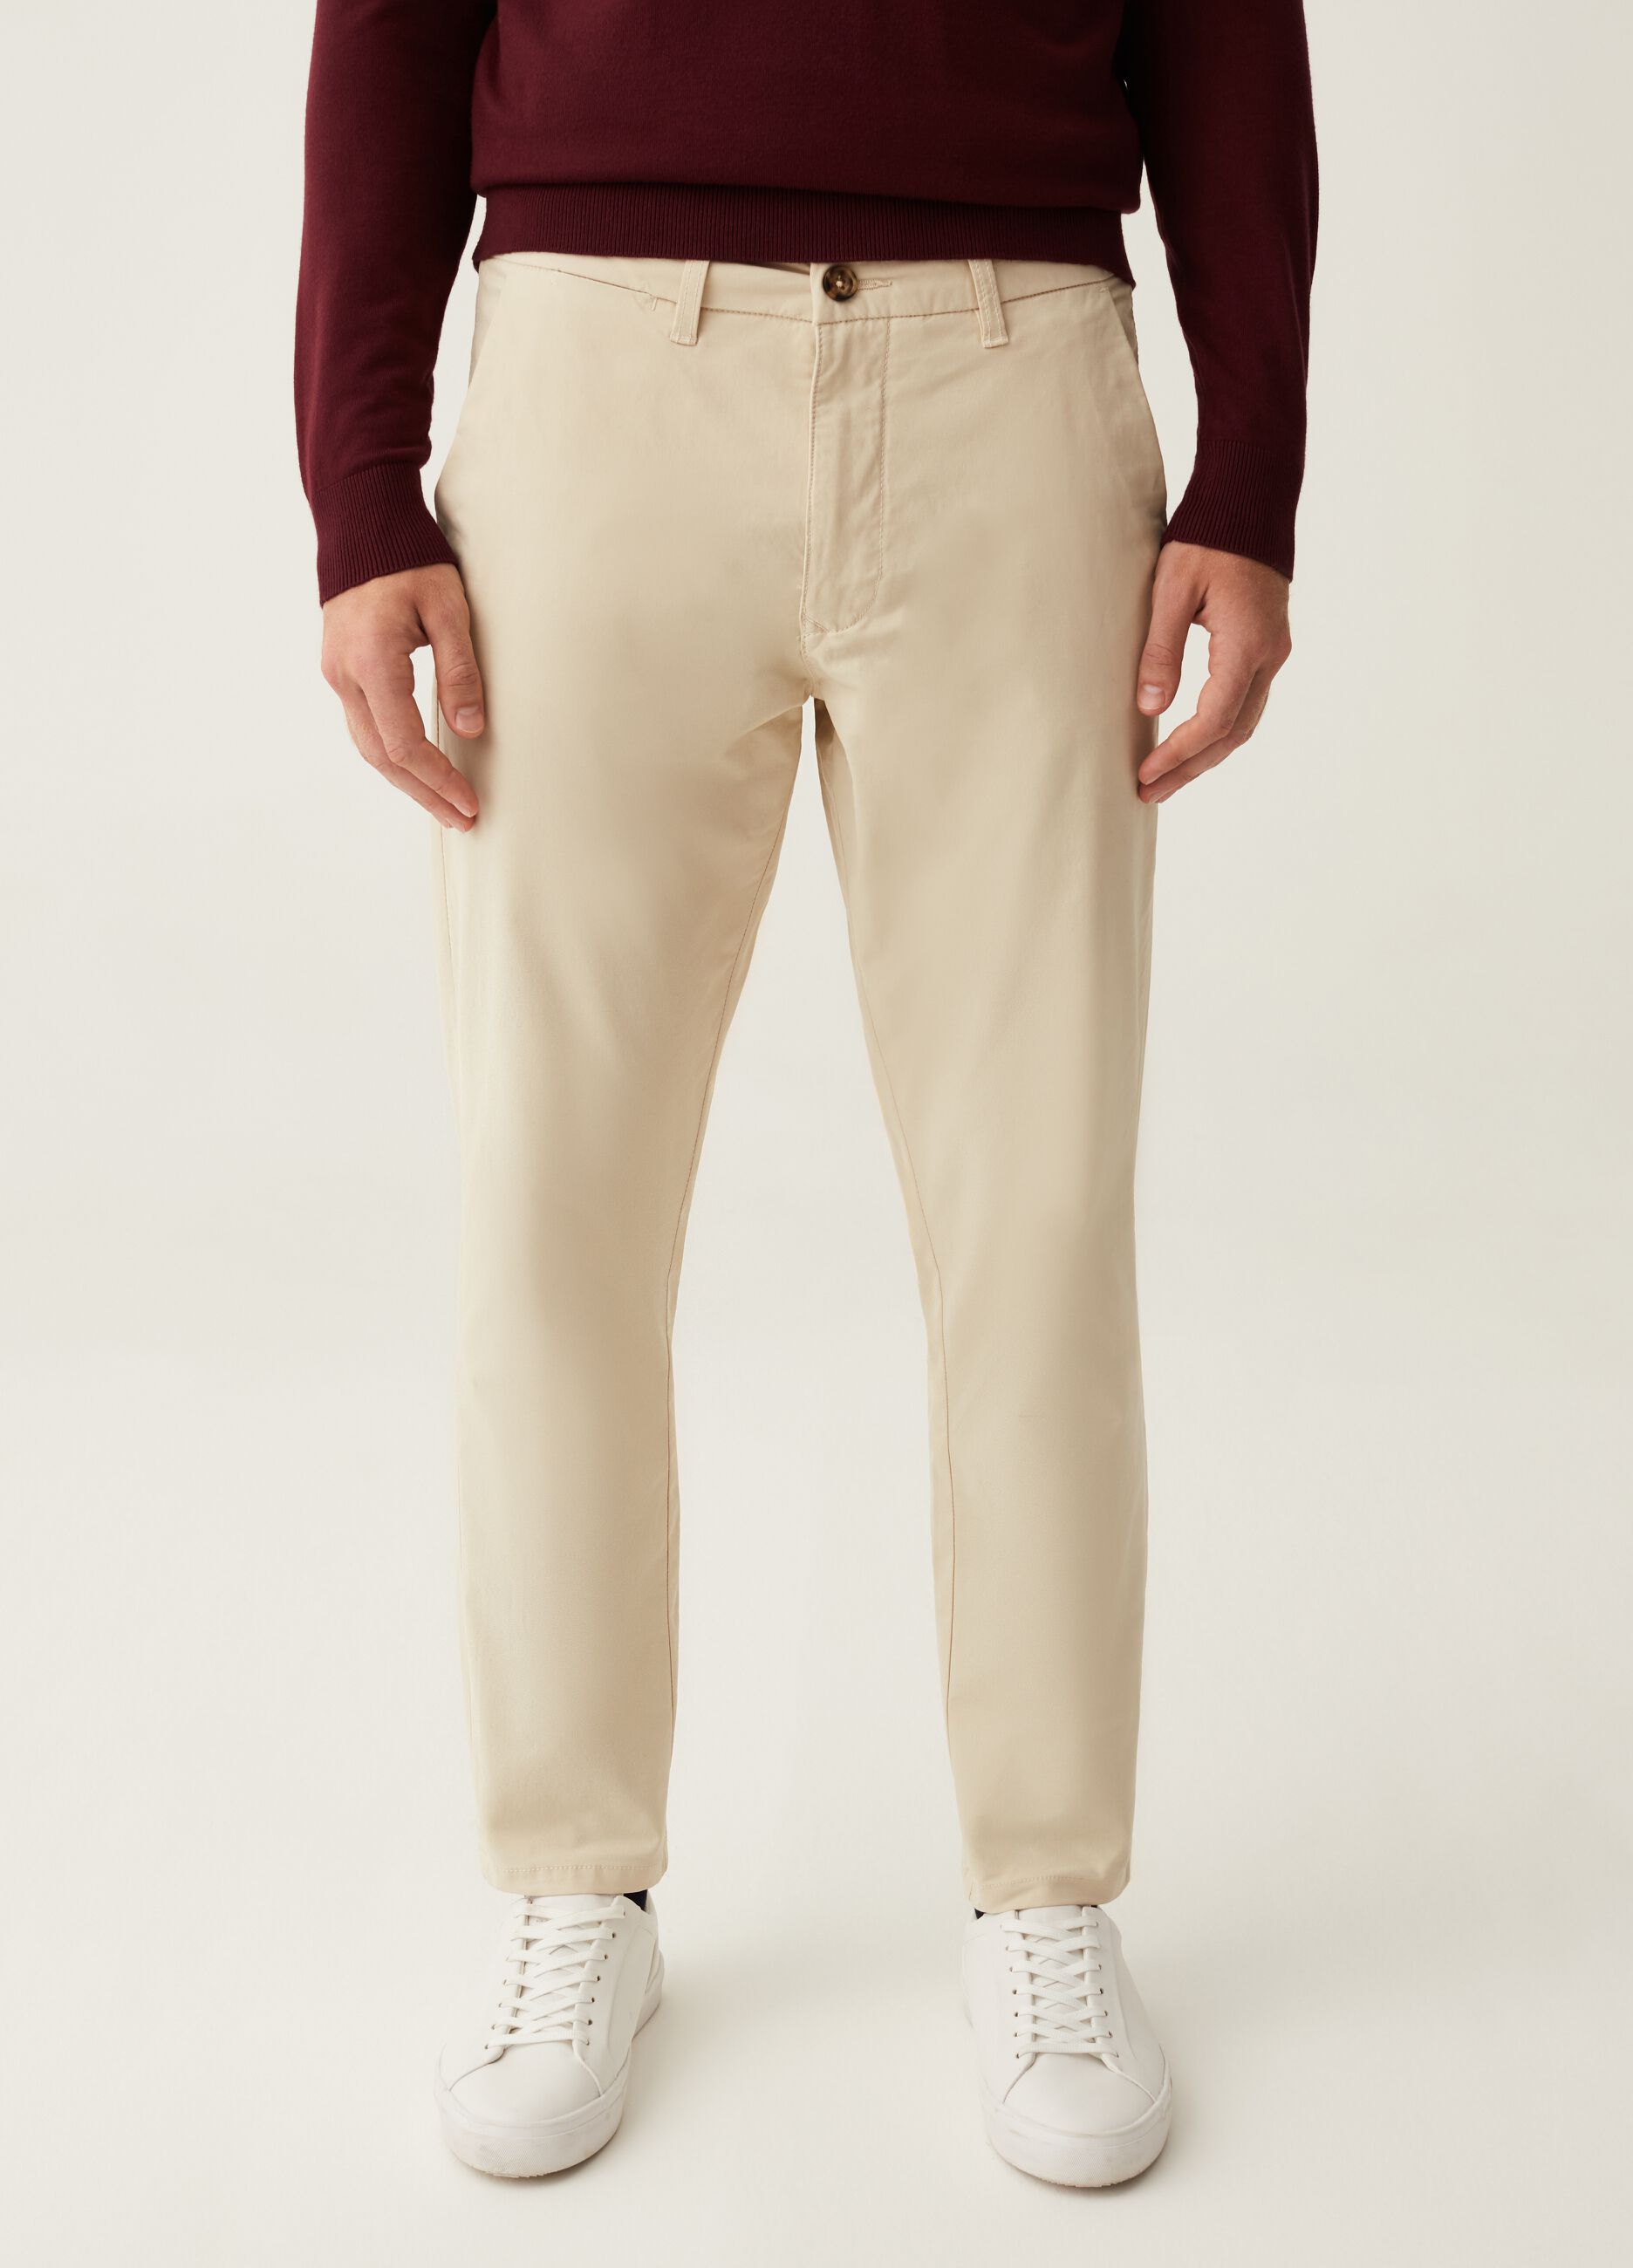 Wrinkle-Free Pants with Pant Stretchers